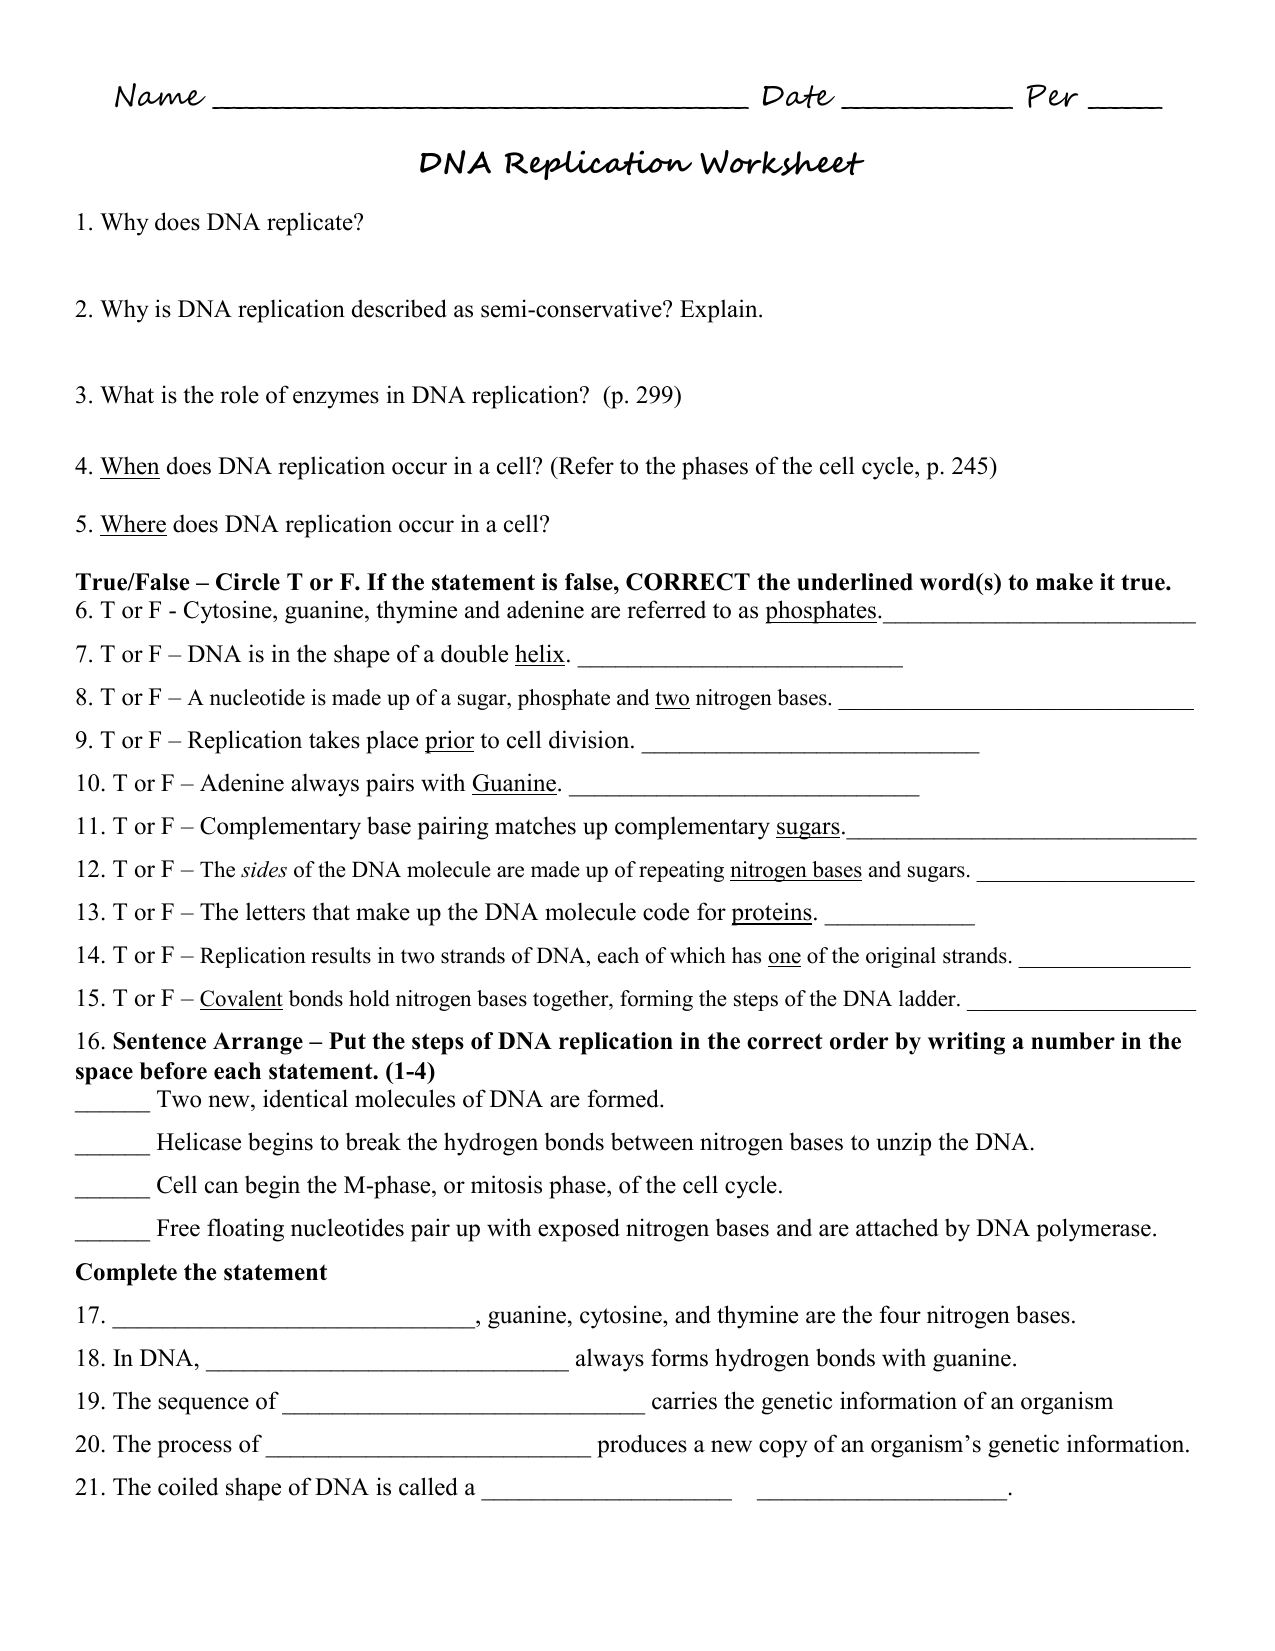 DNA Replication Worksheet Intended For Dna Replication Worksheet Answers